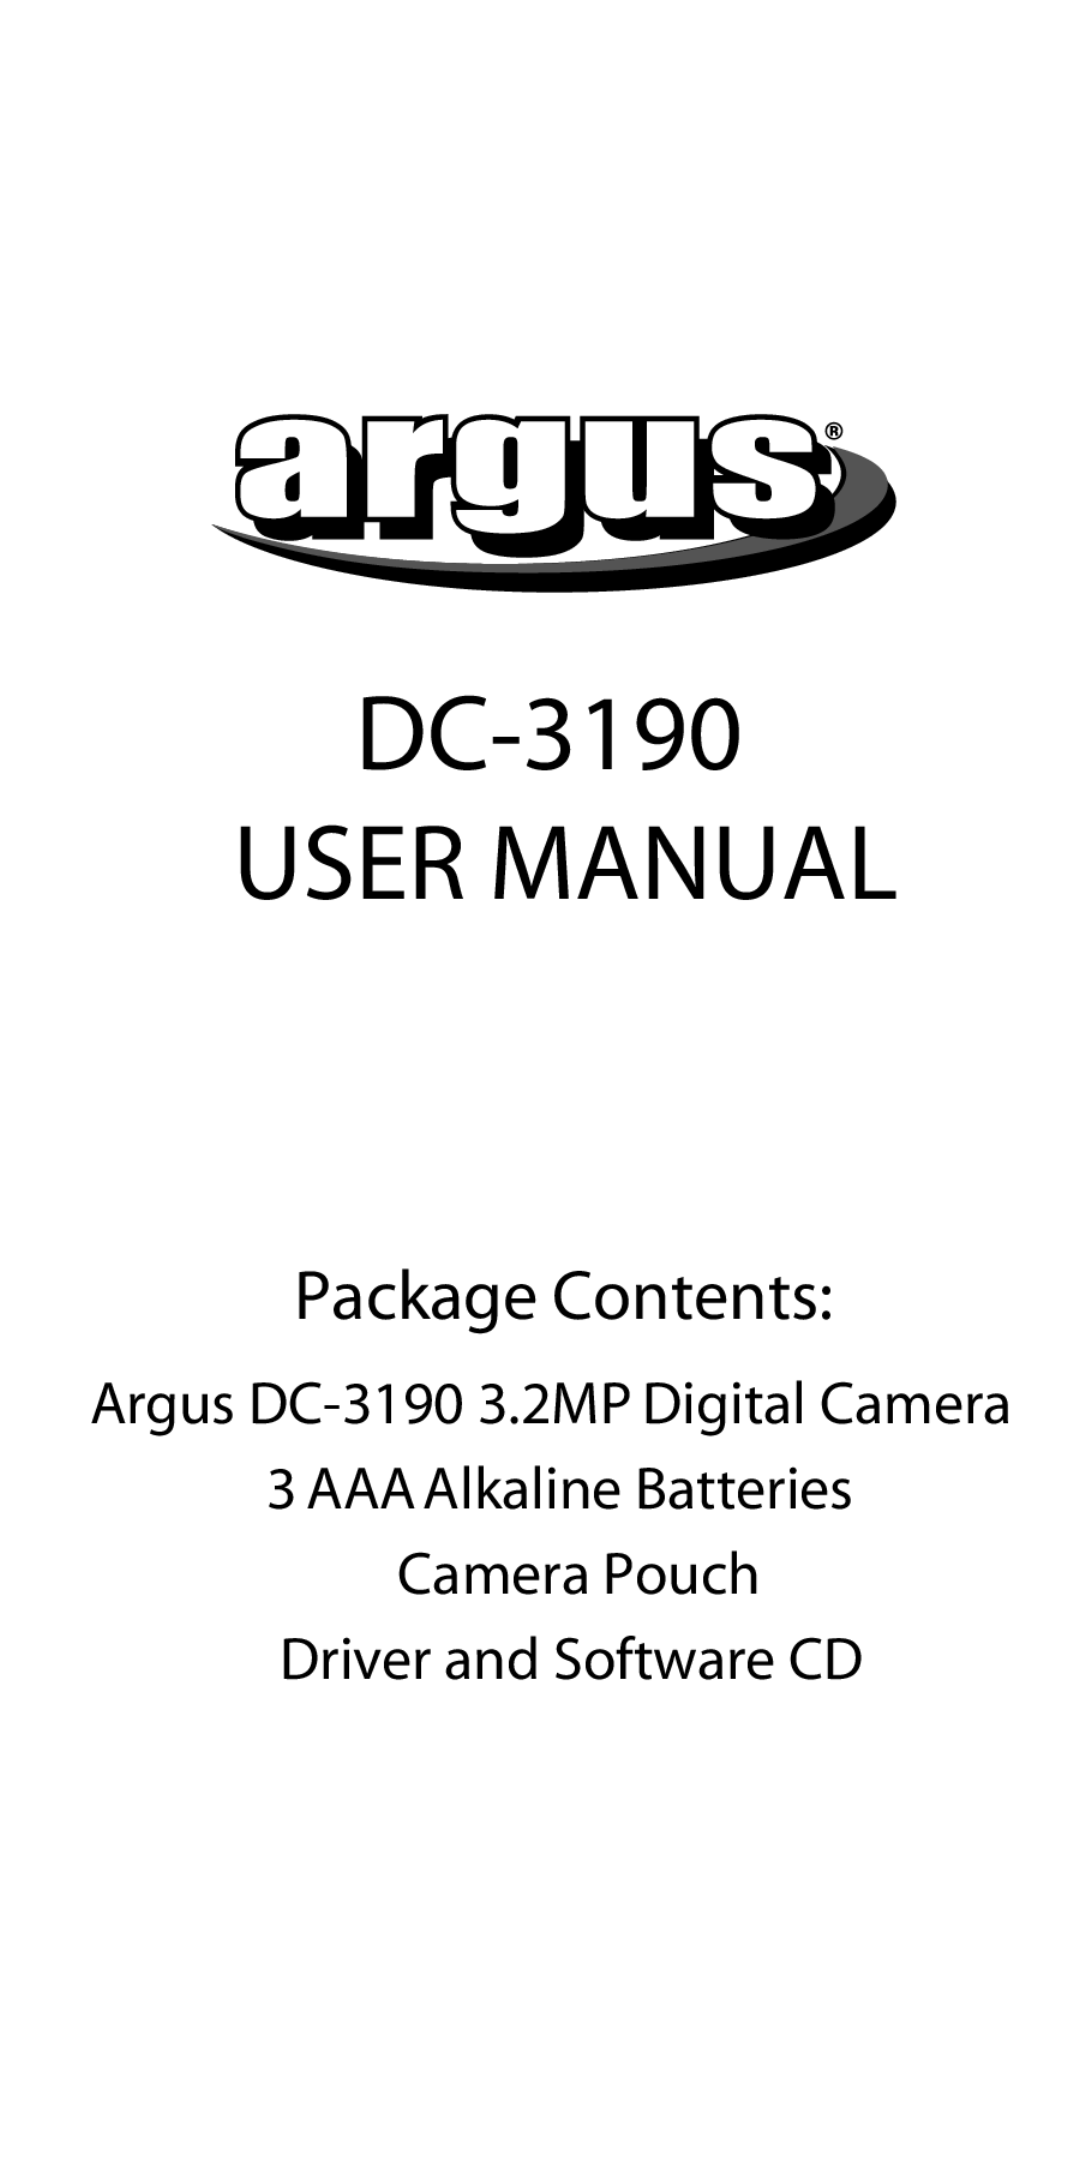 Argus Camera manual Package Contents, DC-3190 USER MANUAL, AAA Alkaline Batteries Camera Pouch Driver and Software CD 